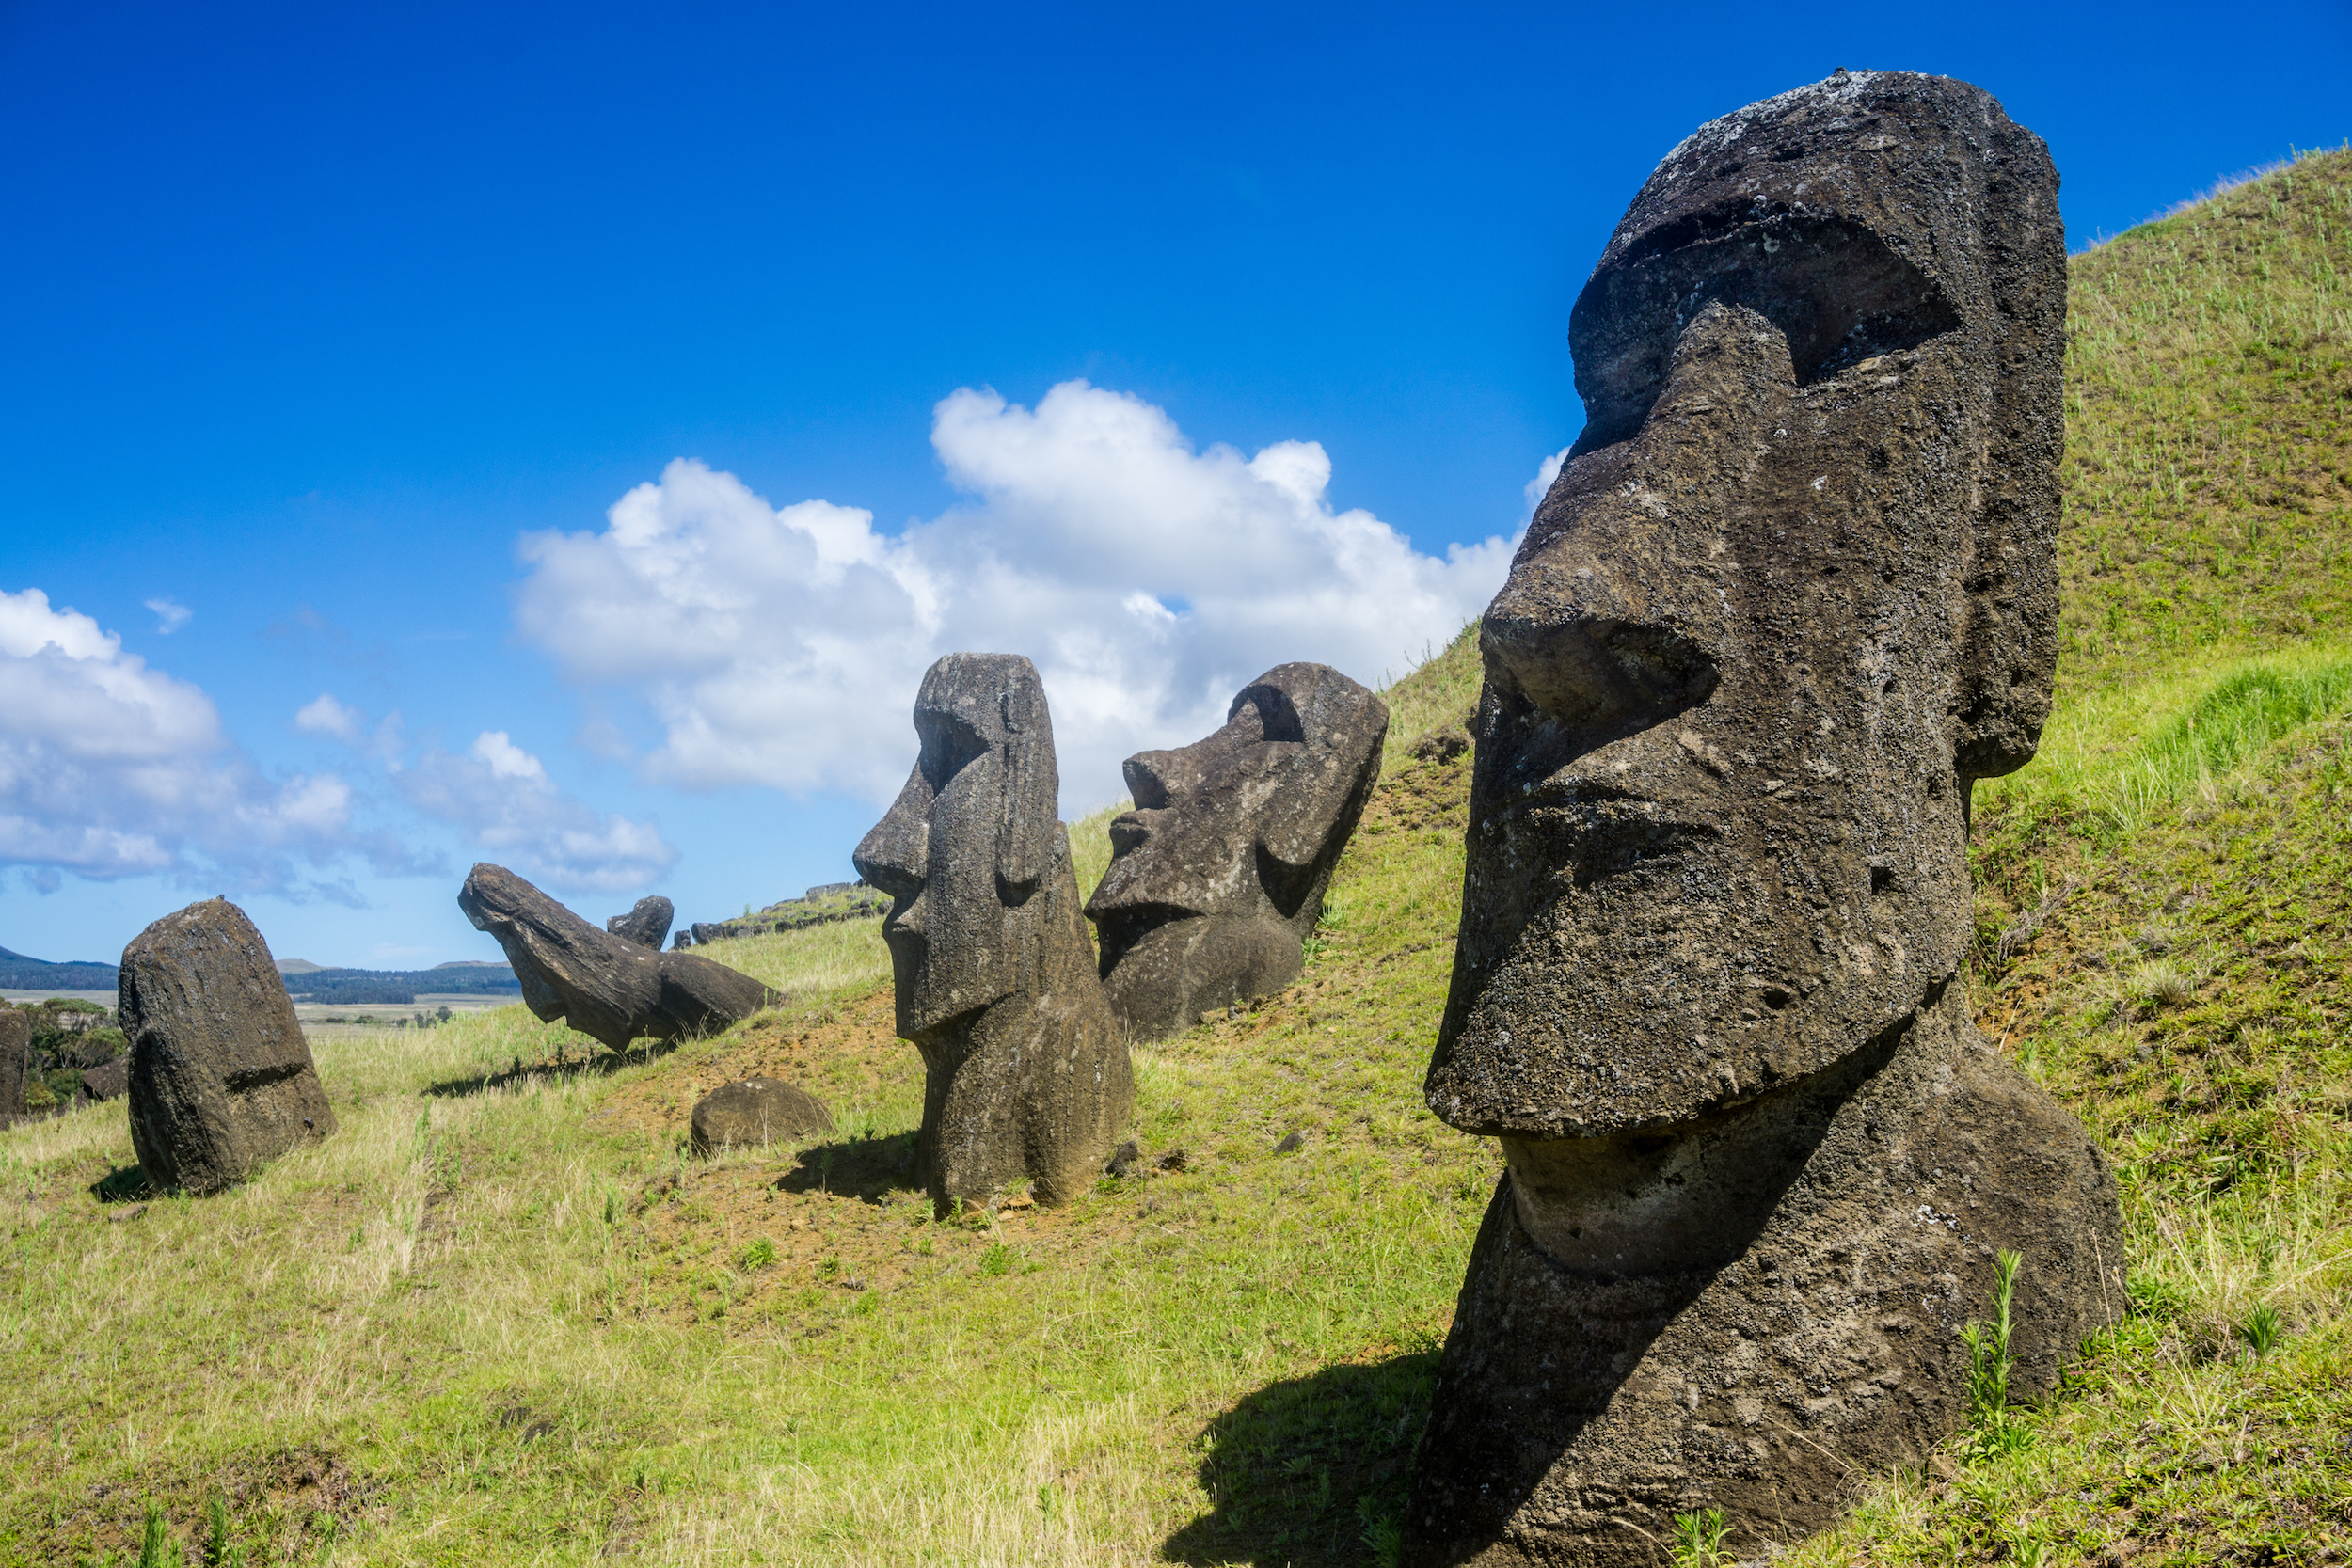 Man slams truck into Easter Island statue, causing 'incalculable damage'